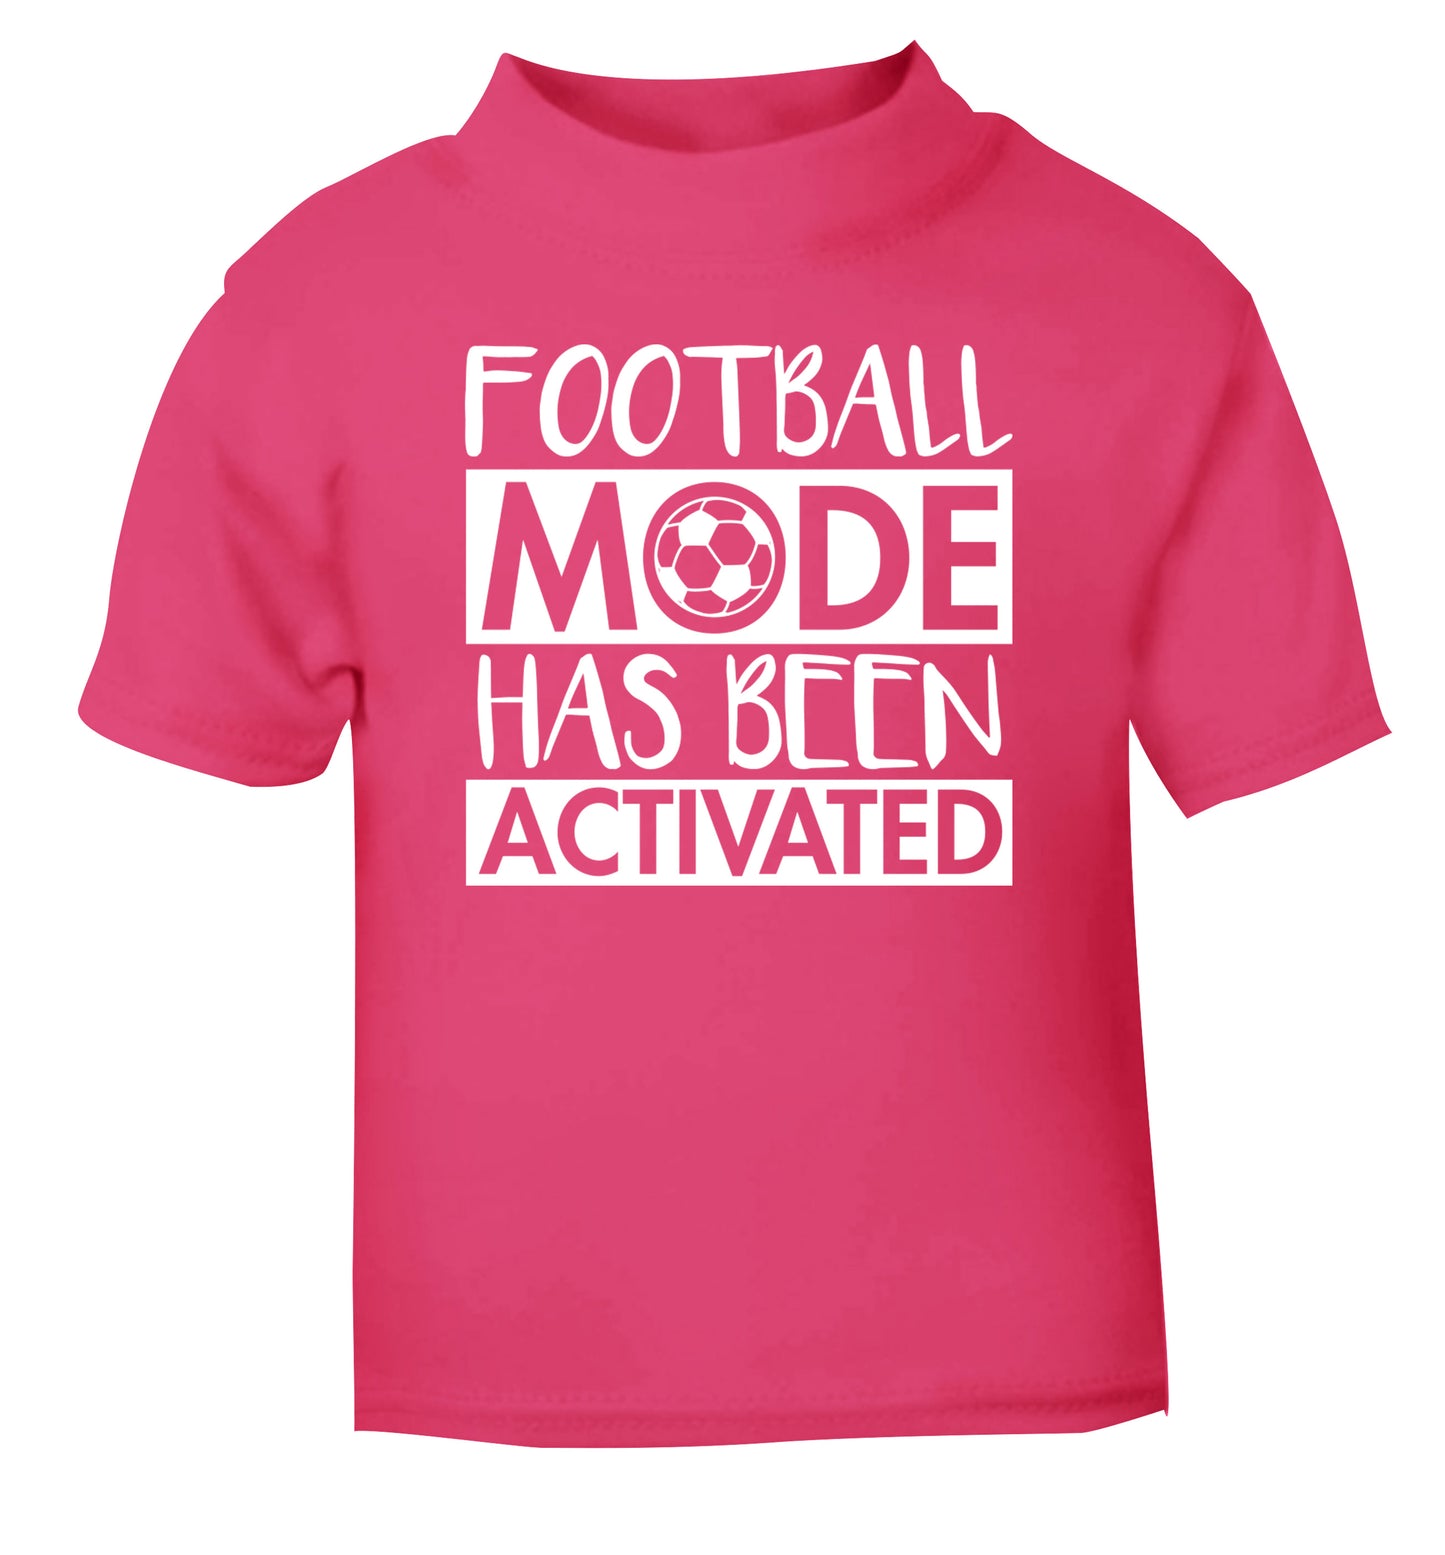 Football mode has been activated pink Baby Toddler Tshirt 2 Years